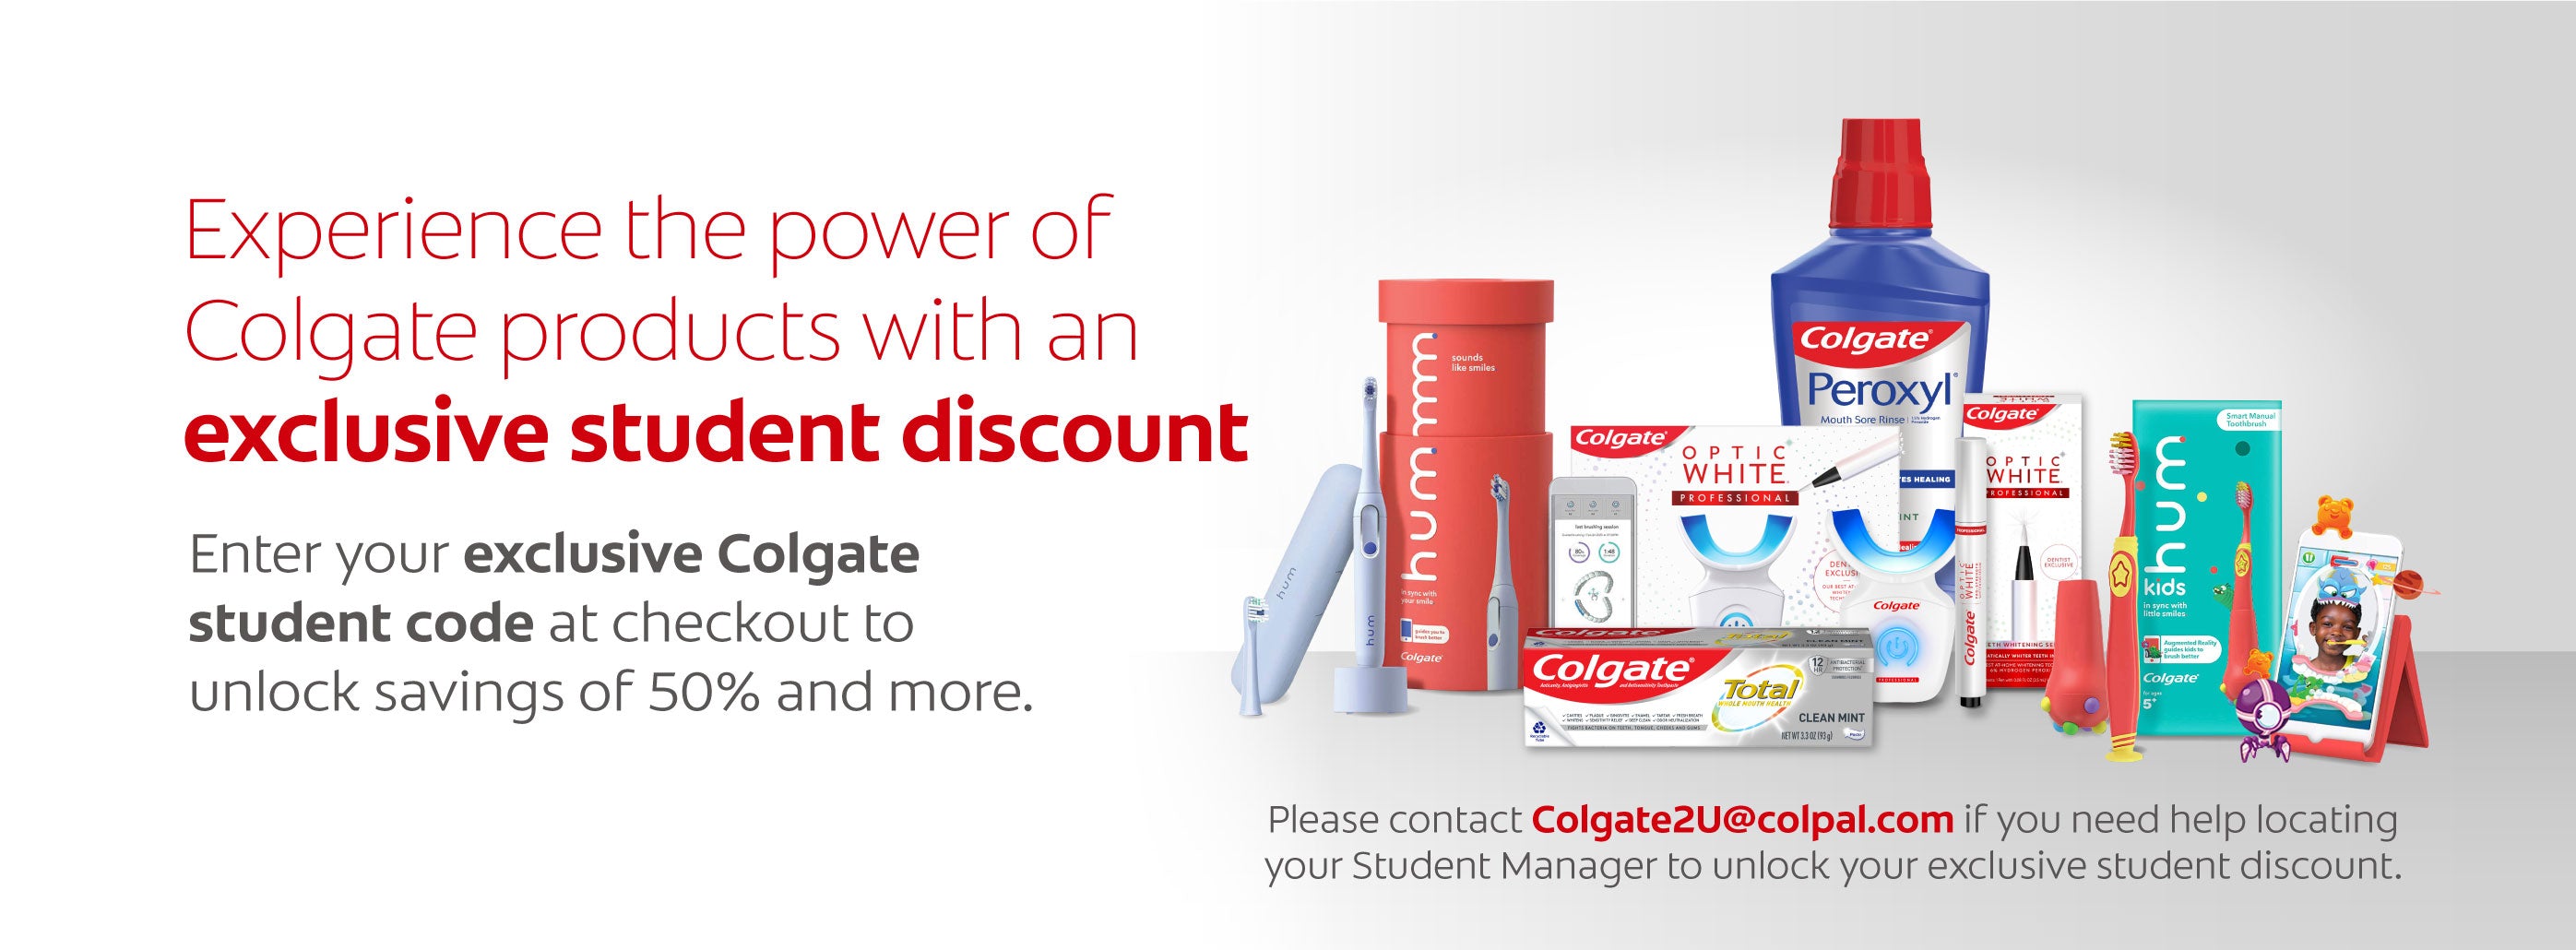 The Colgate platform to experience Colgate's products